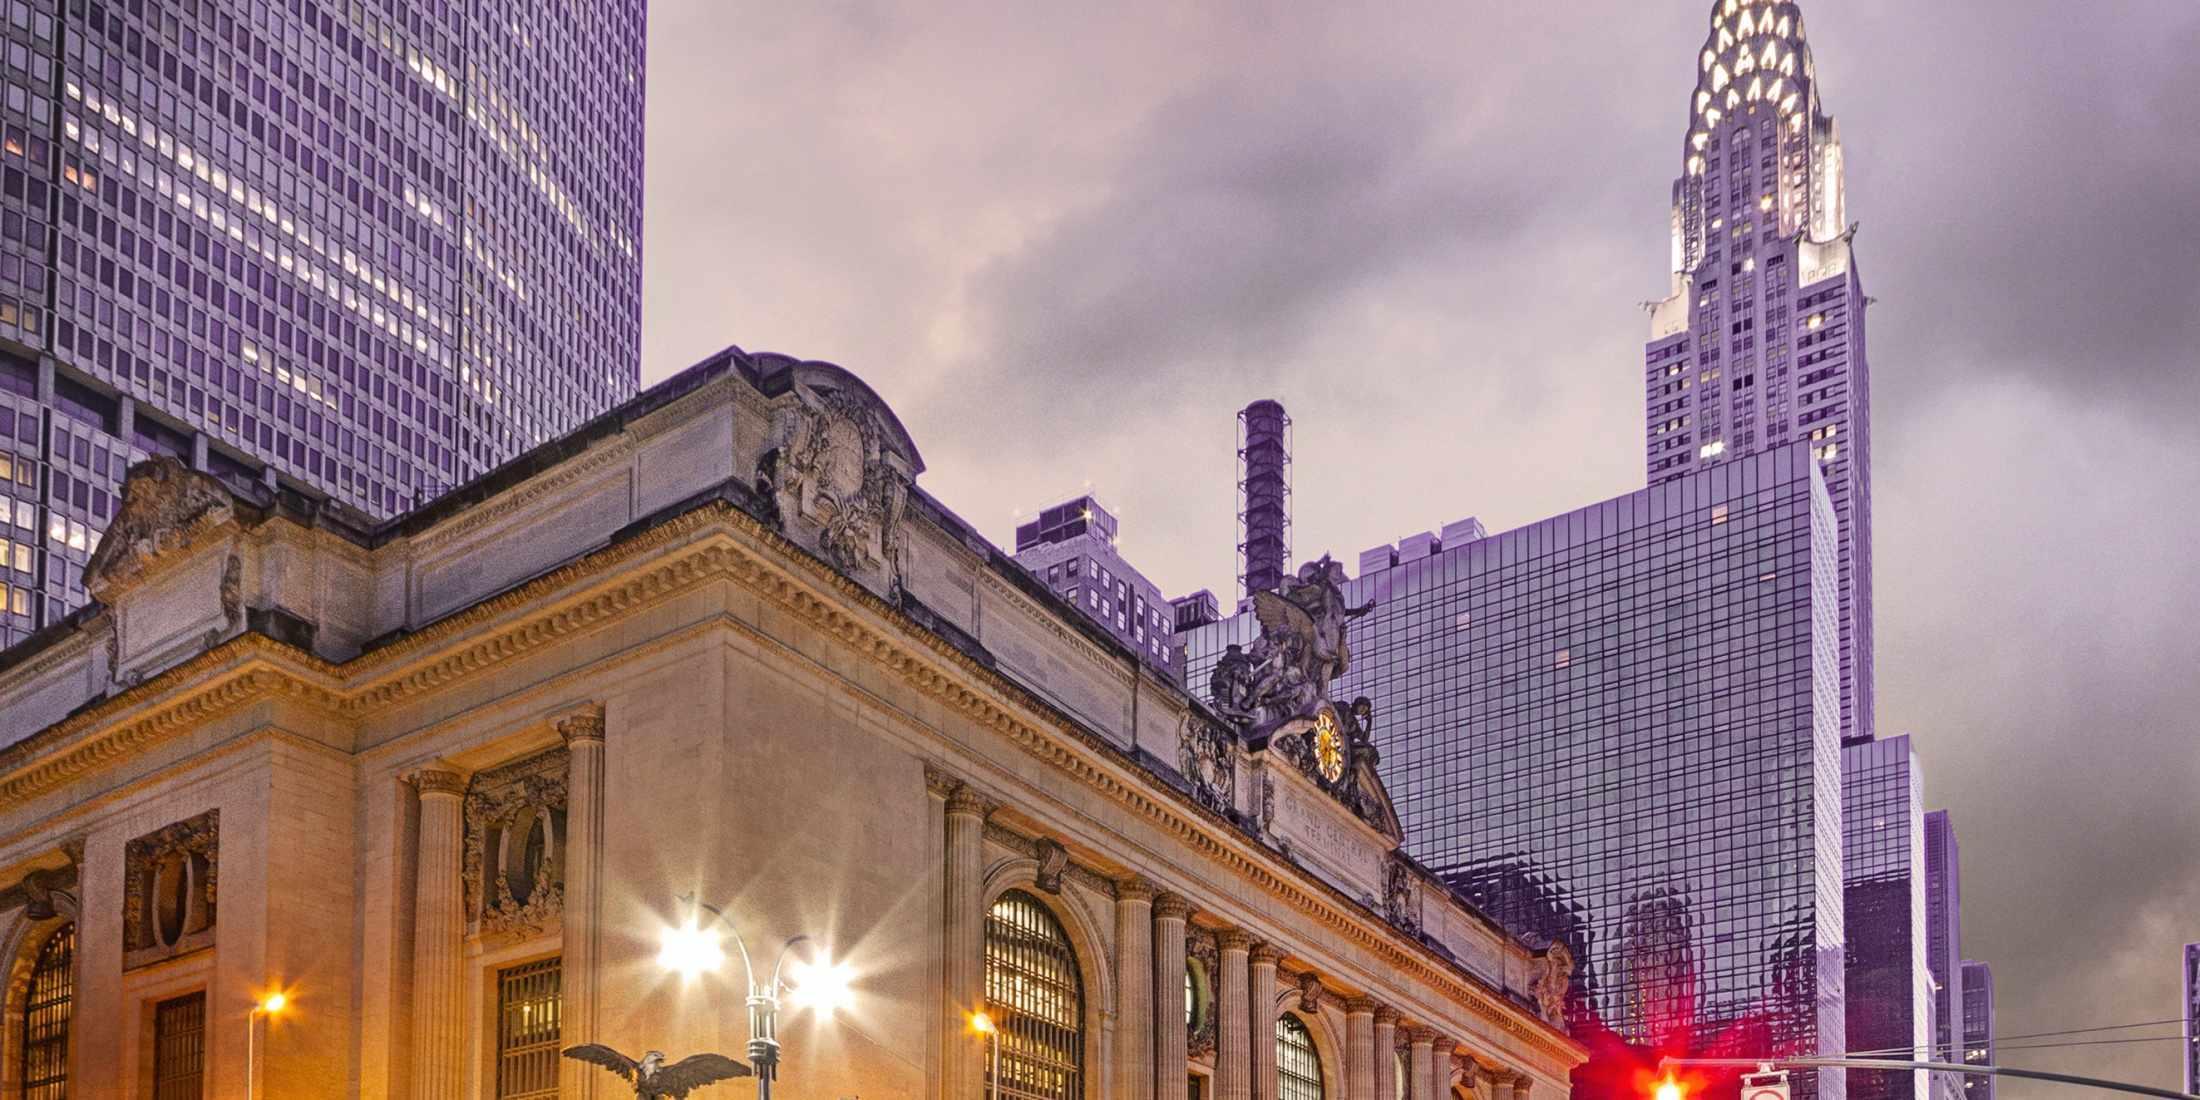 The historic Grand Central Station!